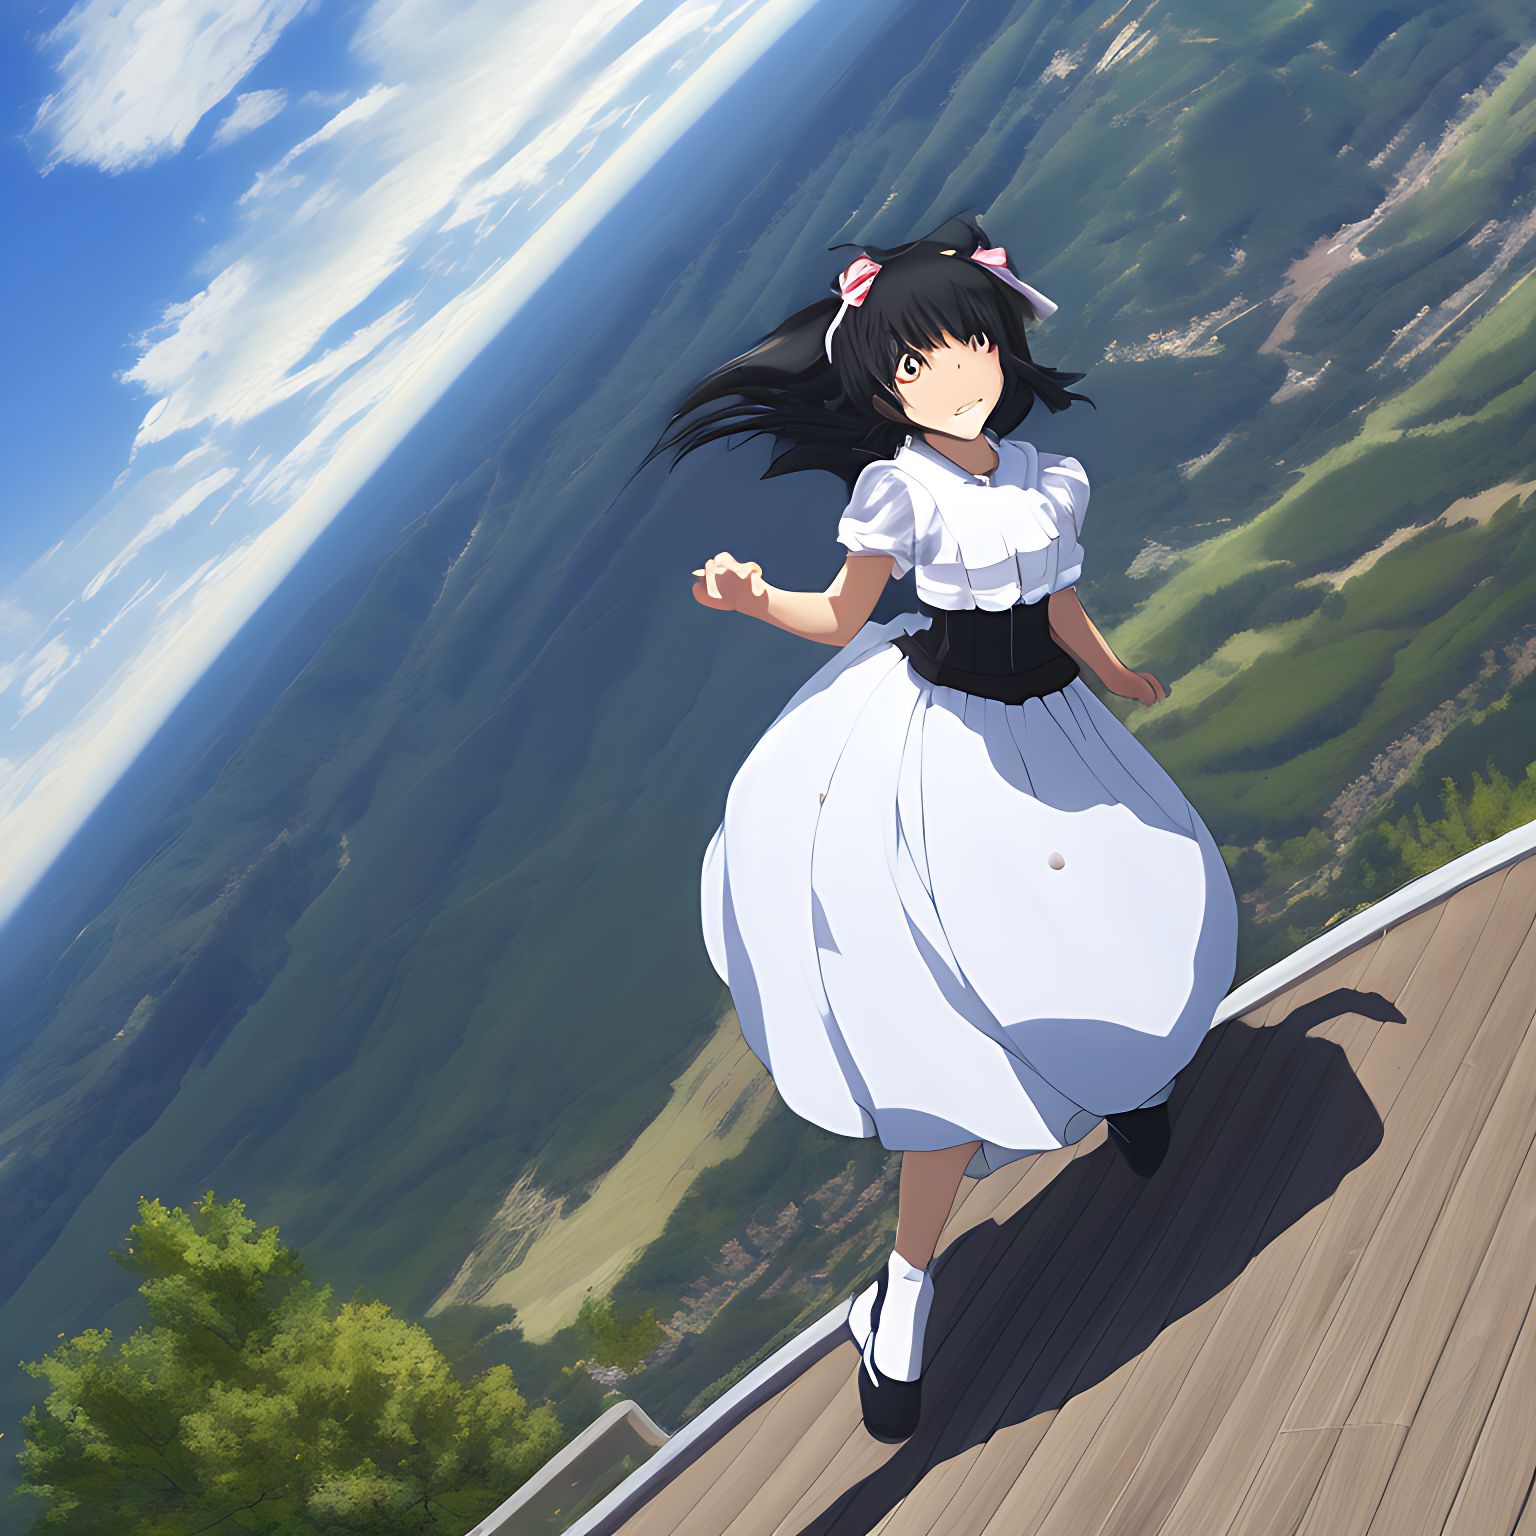 shoddy-mink819: anime girl wearing a maid dress skydiving